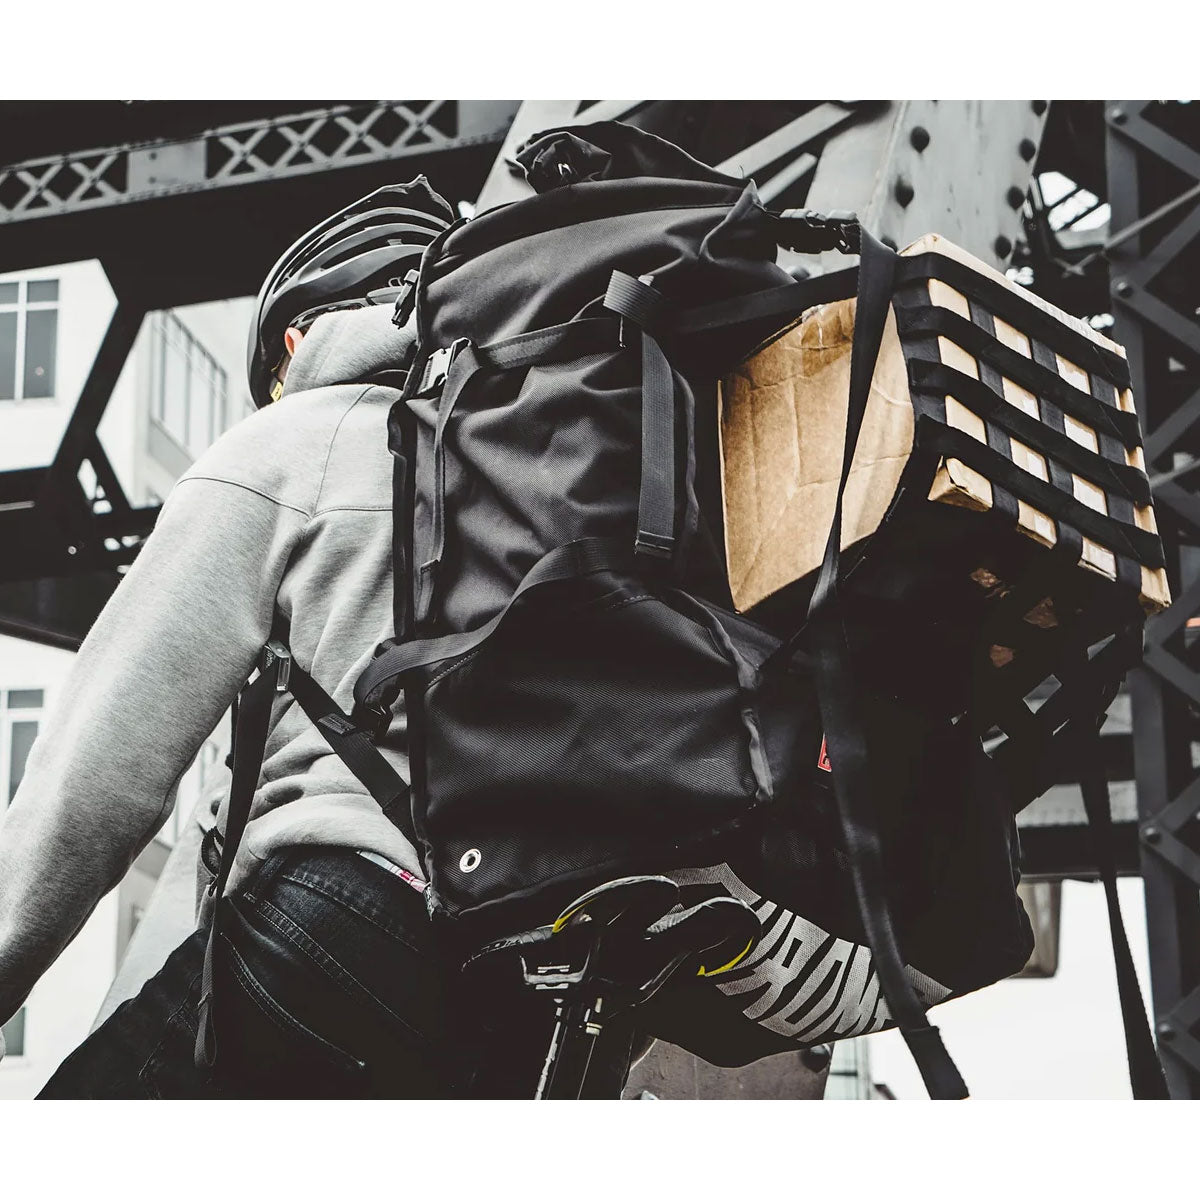 Chrome Industries : Barrage Pro Backpack 80L